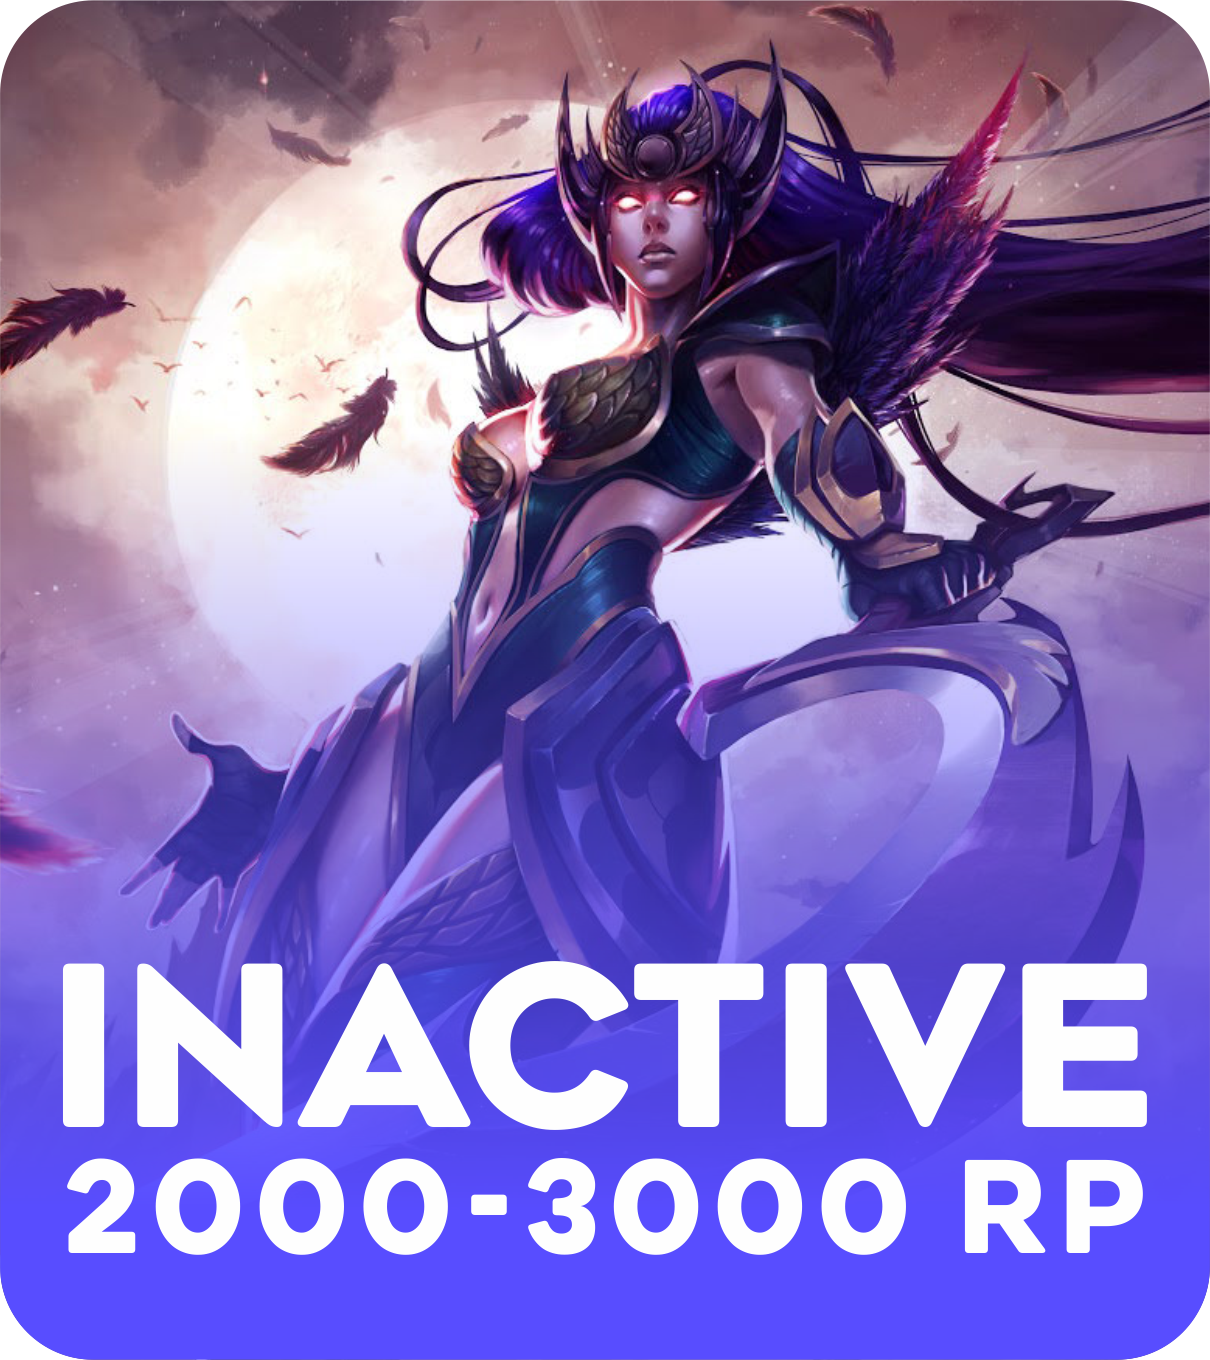 Inactive 2000-3000 RP Account